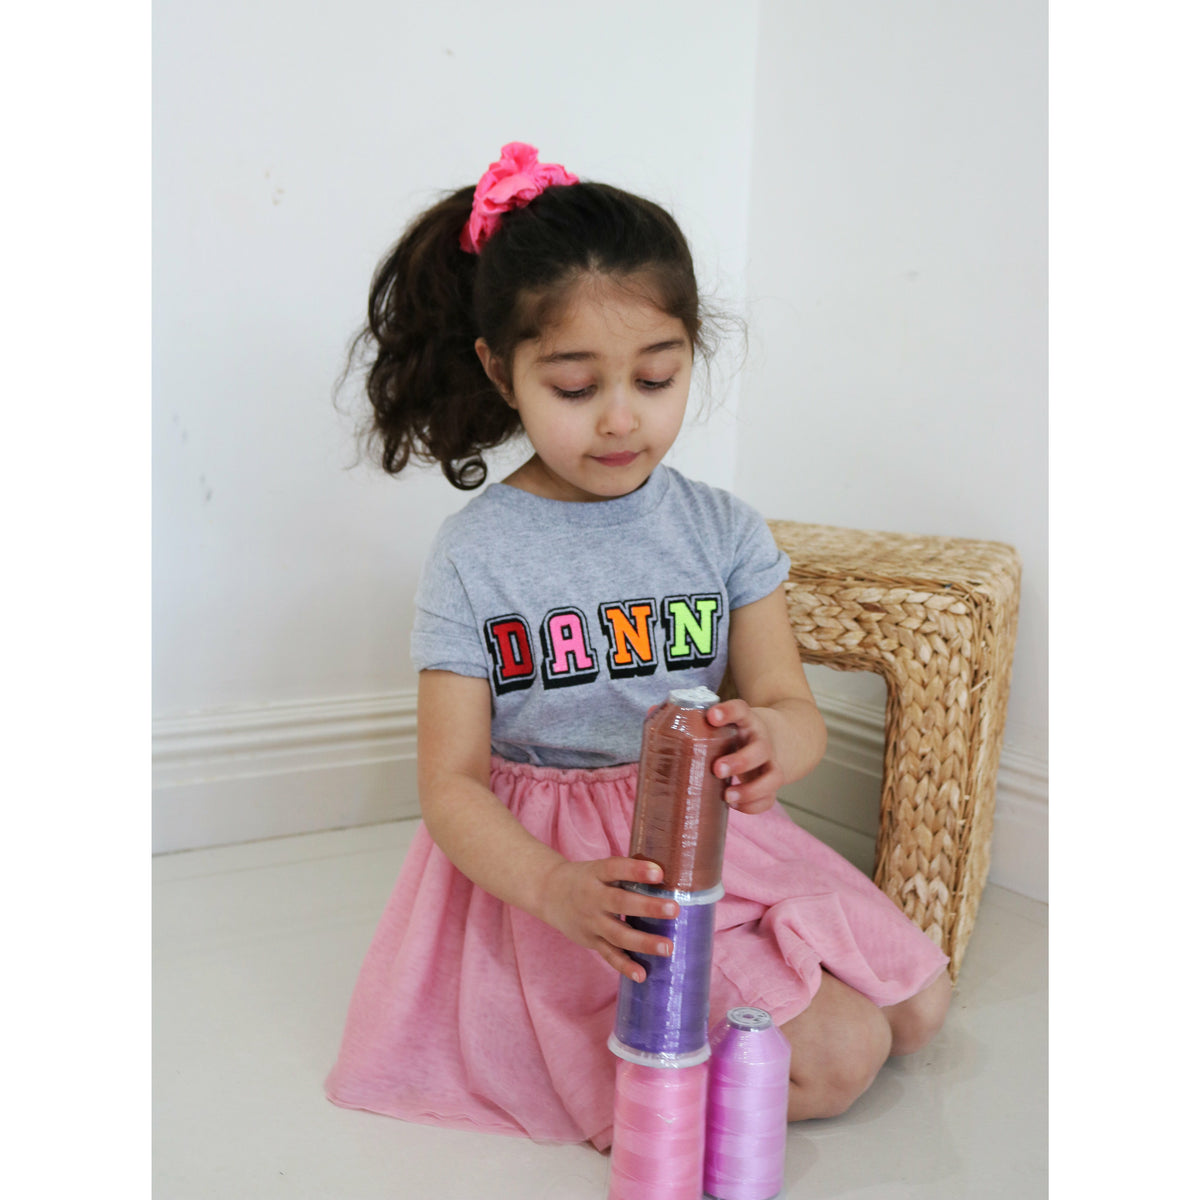 Kids t-shirt personalised 3D text or initials